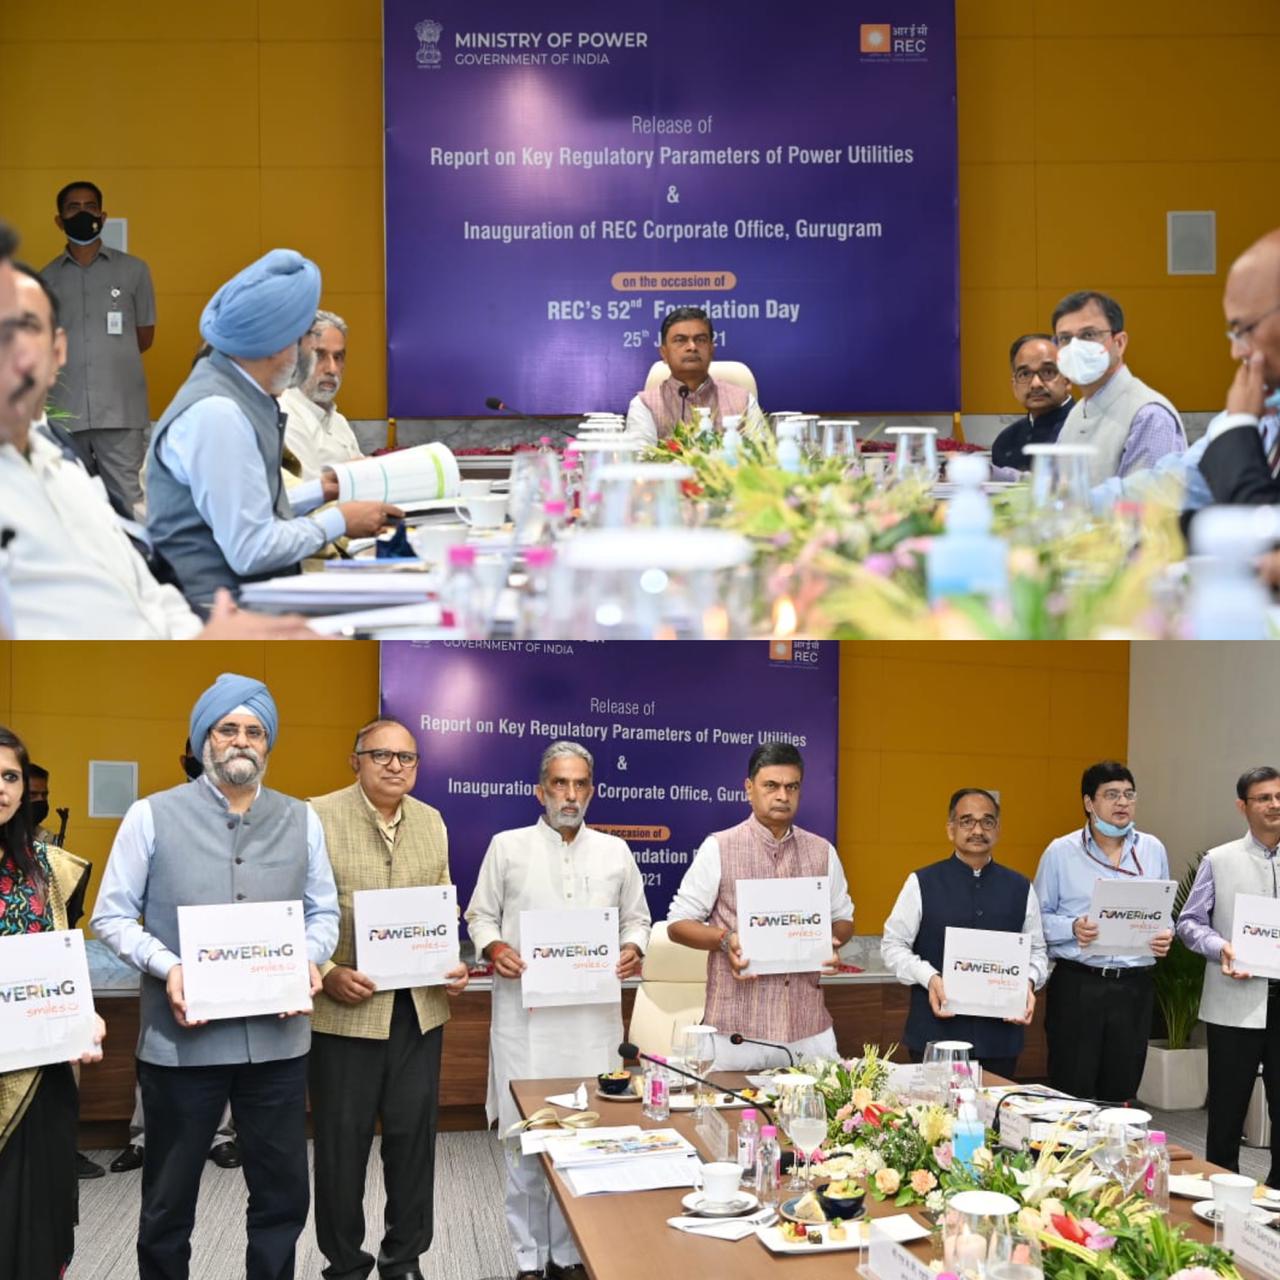 Union Power Minister And Minister of State For Power Release a Report on Key Regulatory Parameters of Power Utilities As Part of Azadi Ka Amrit Mahotsav